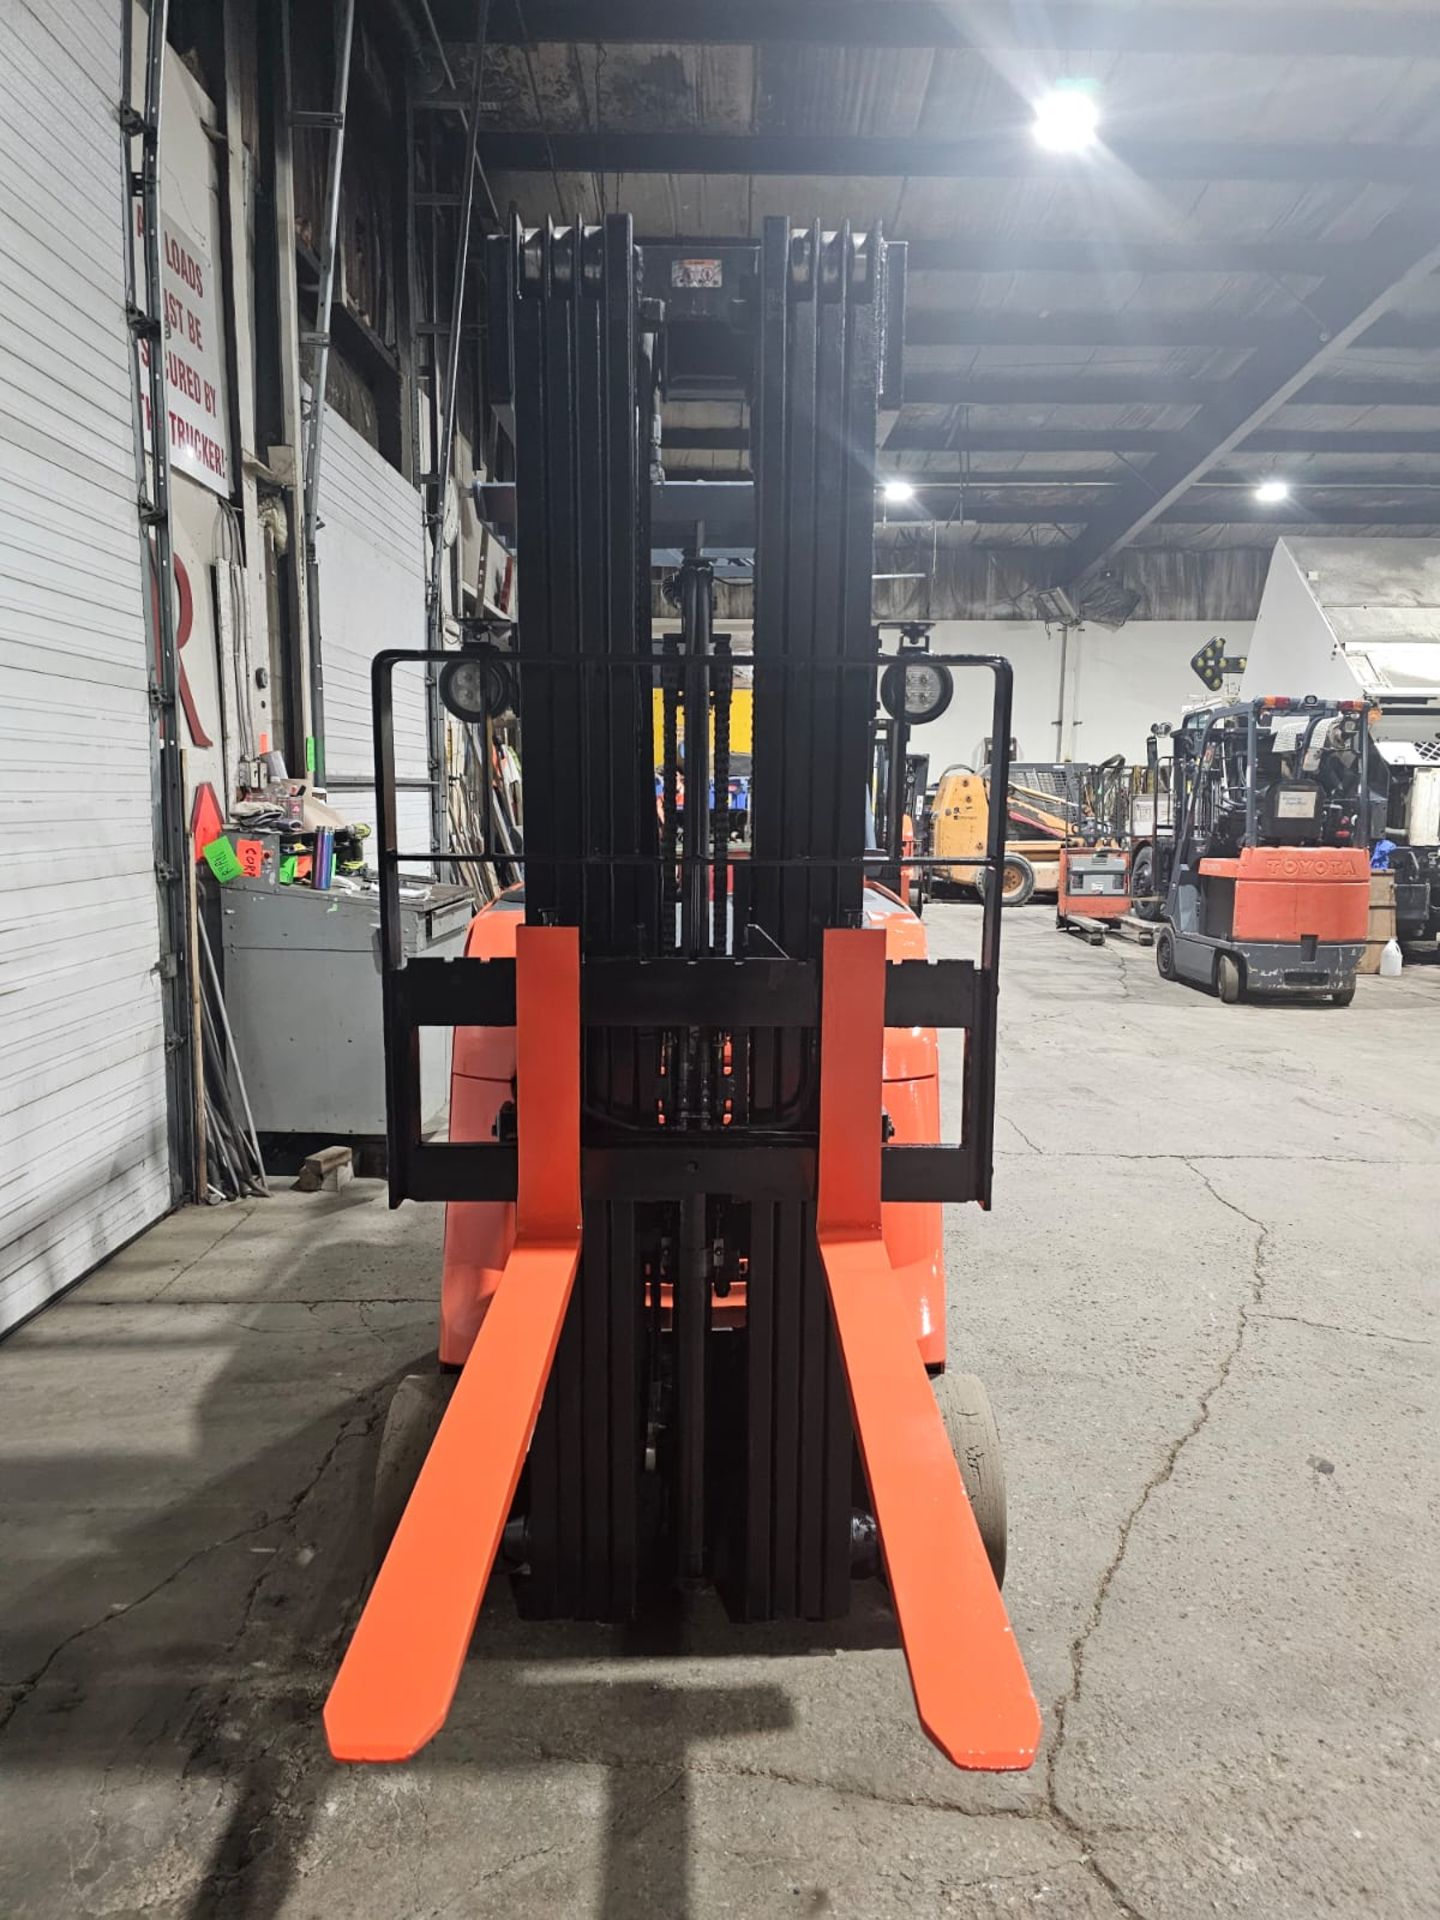 2017 Toyota 4,000lbs Capacity Electric Forklift with 4-STAGE Mast, 276" load height sideshift, 36V - Image 6 of 7